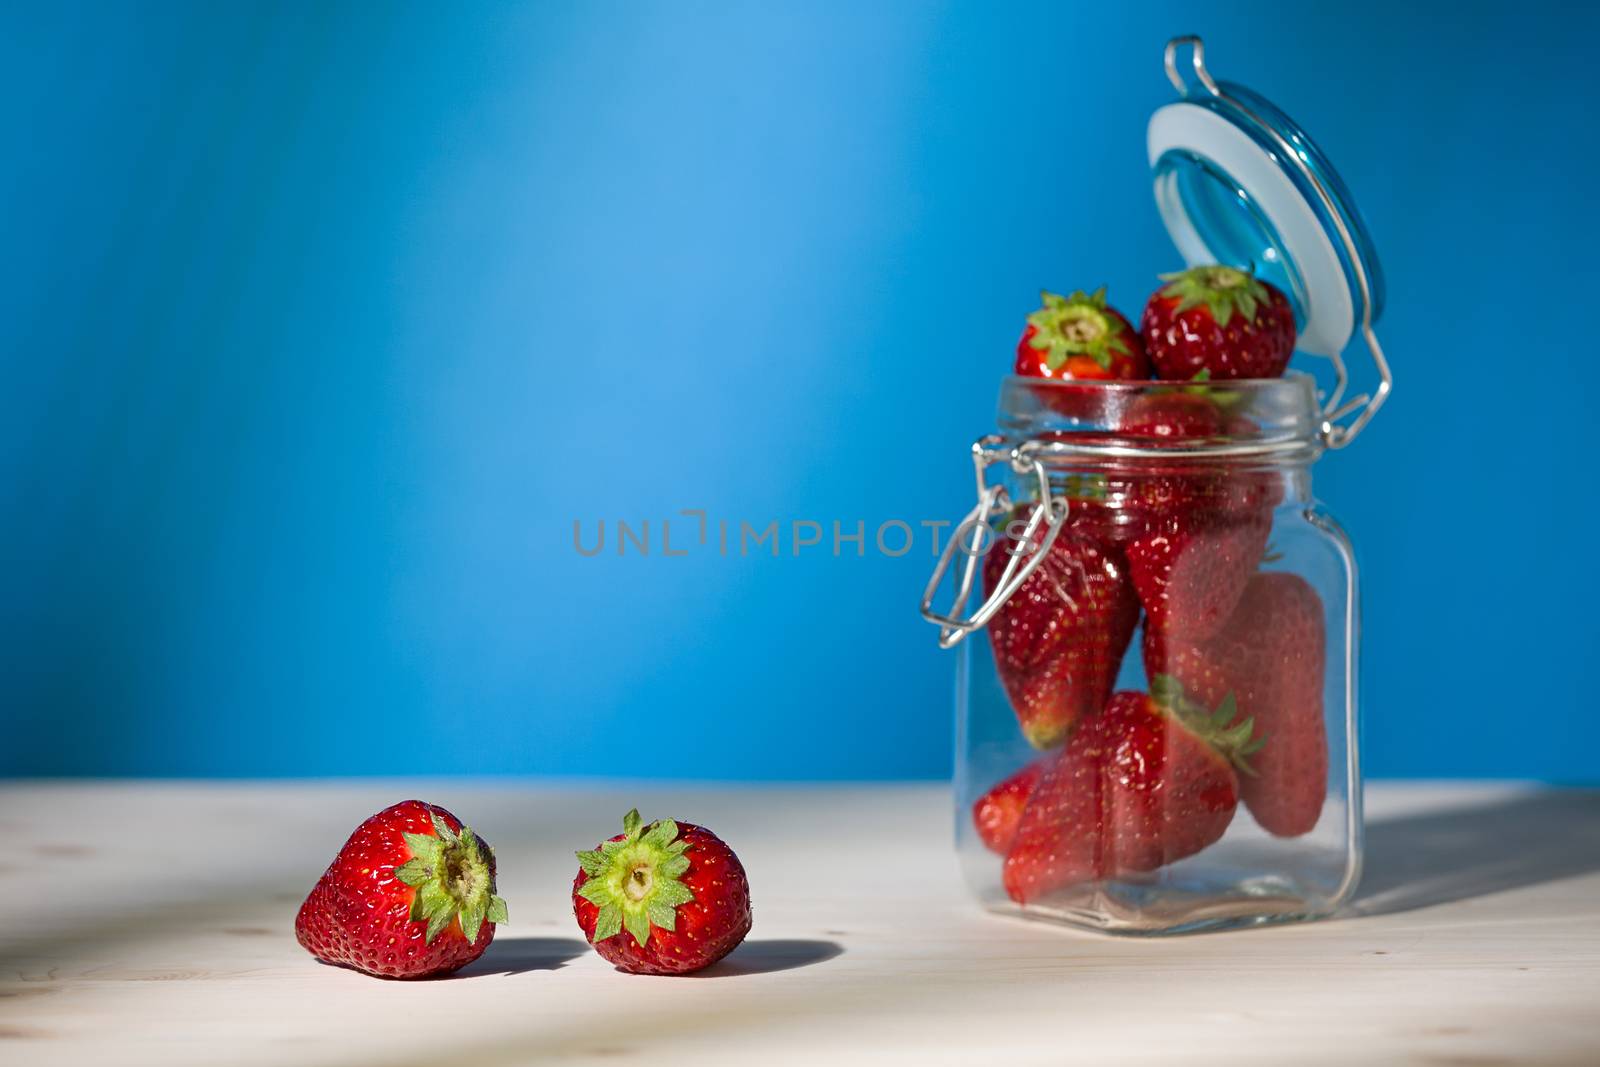 Strawberries on a table and a glass jar full of strawberries with blue background